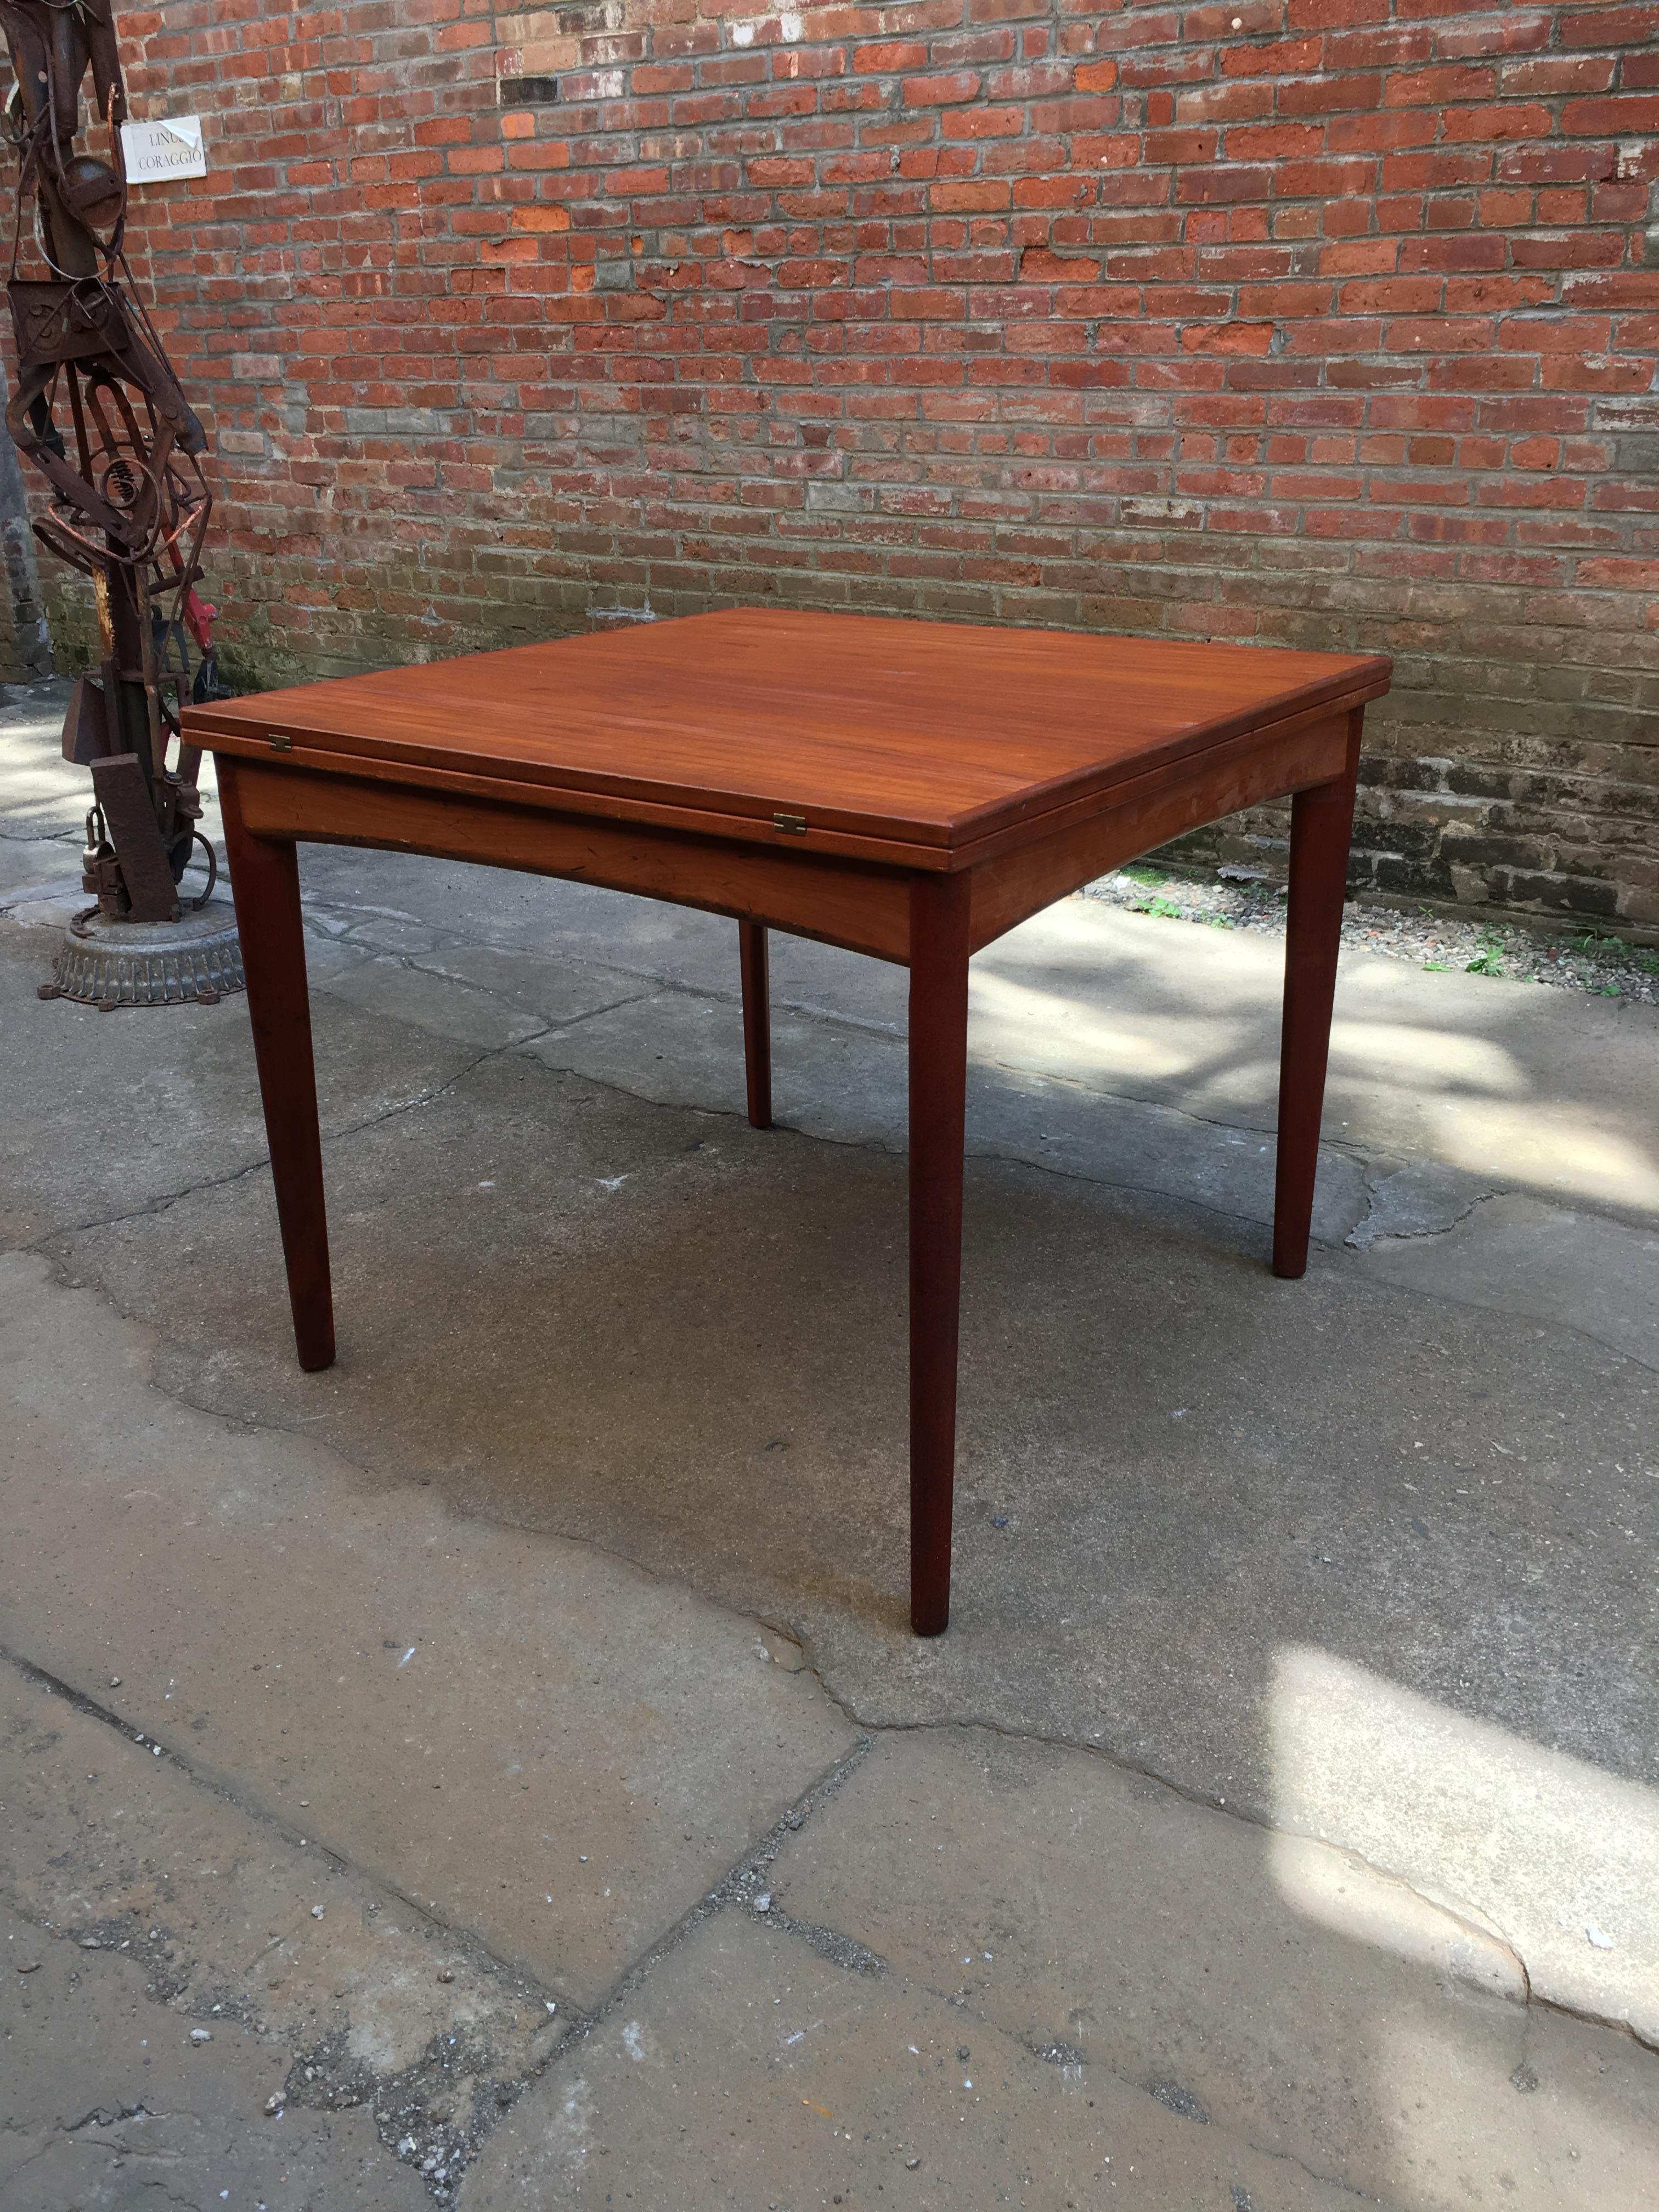 Nice square compact Danish design until you flip and slide the table top to extend it to proper dining/banquet table size. Beautifully figured teak veneers with solid teak legs and arched apron. Felted interior for hidden storage for table clothes,